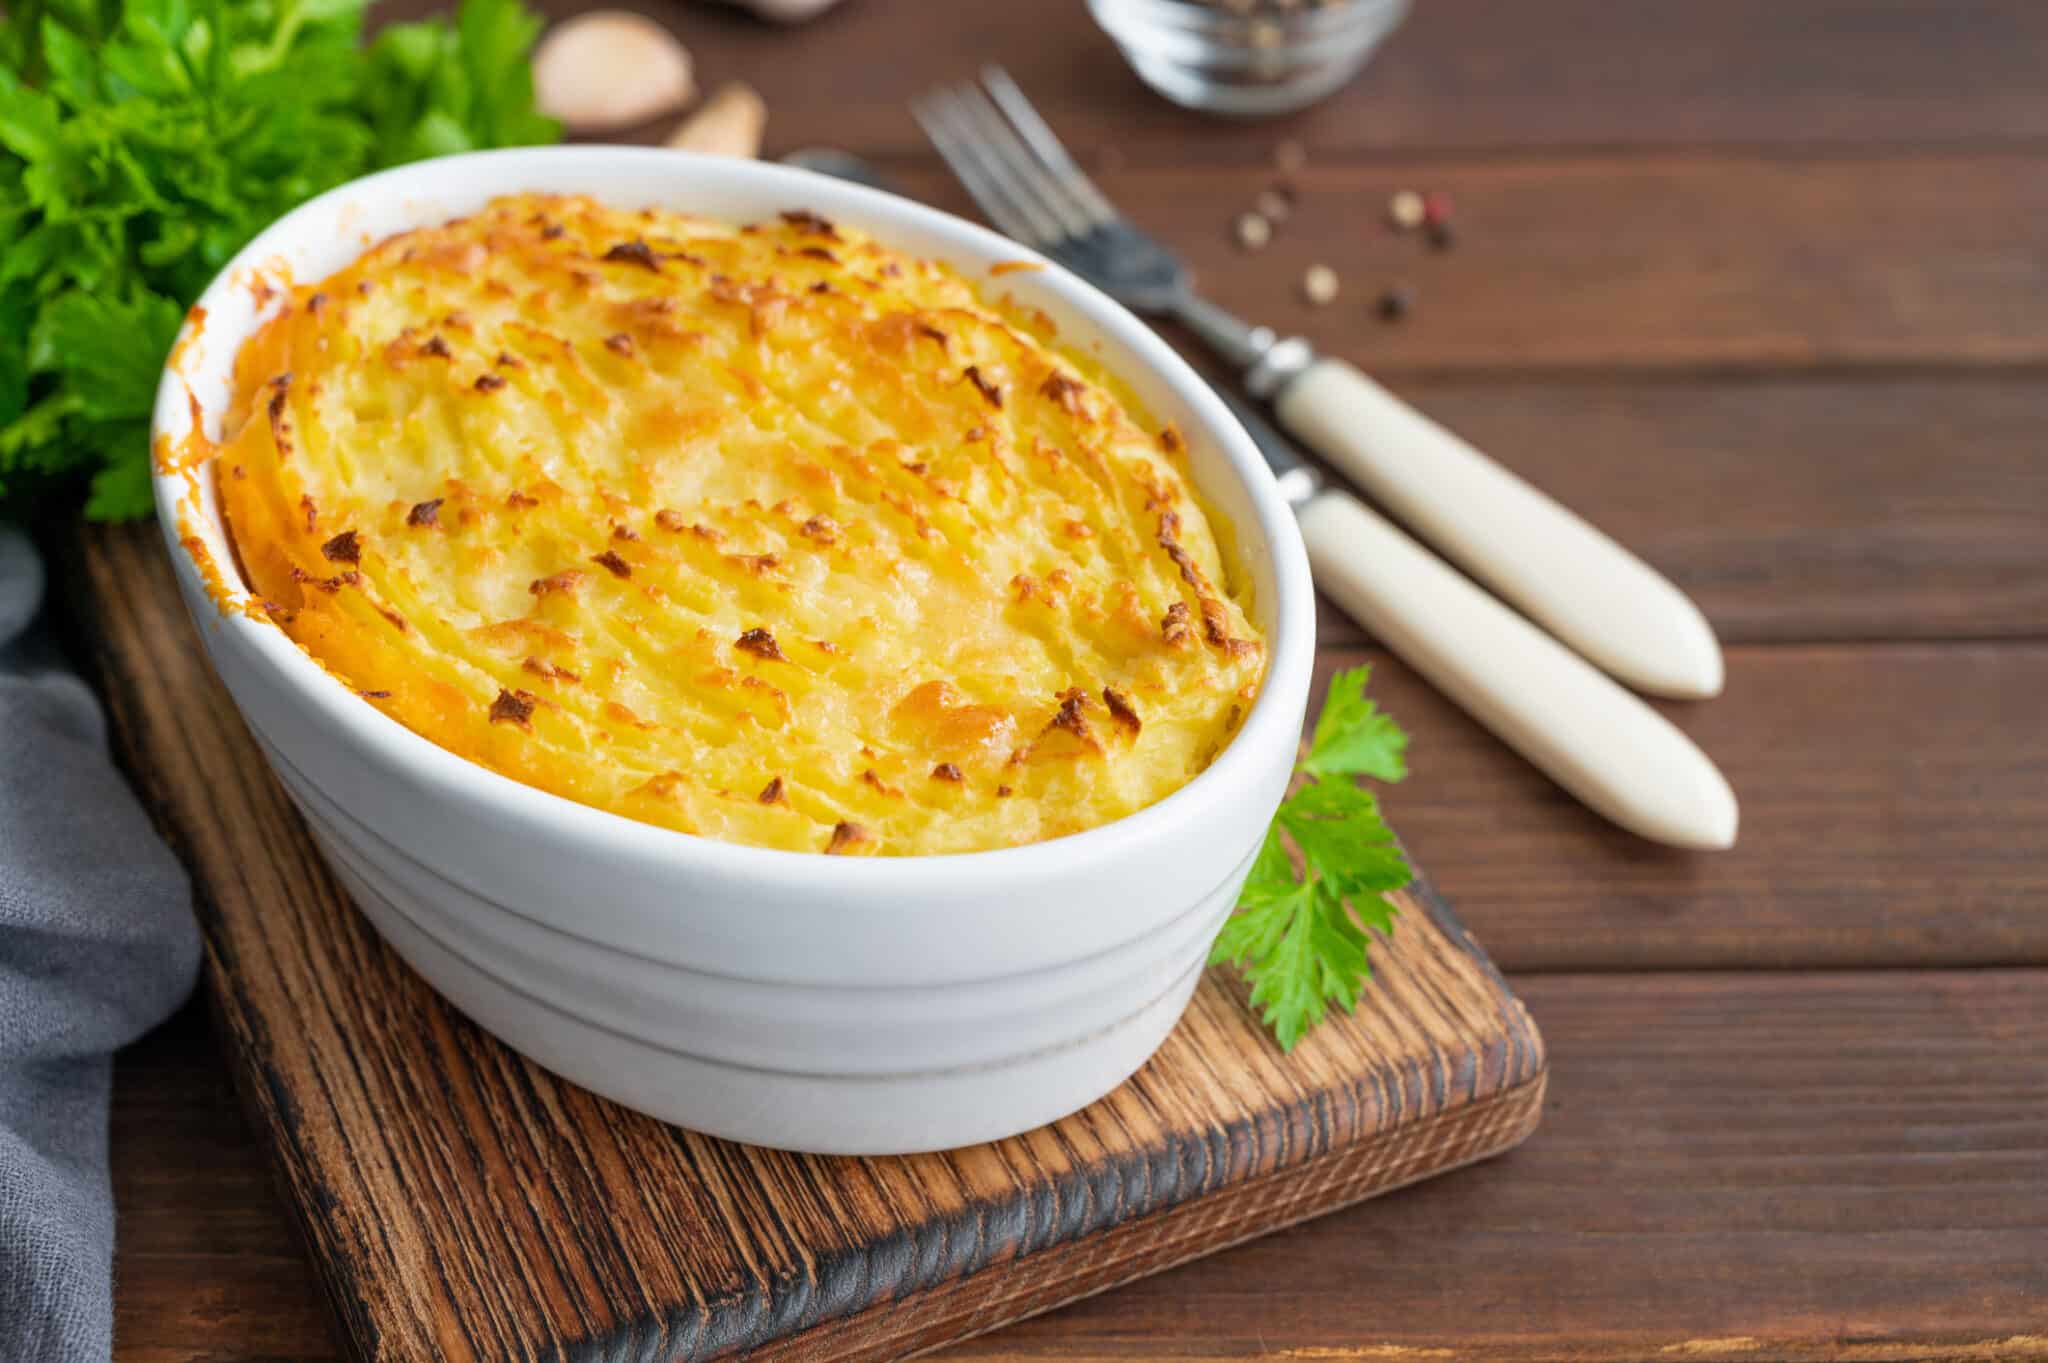 Homemade Shepherd's Pie in the casserole dish on a dark wooden background. Traditional British dish with minced meat and mashed potatoes